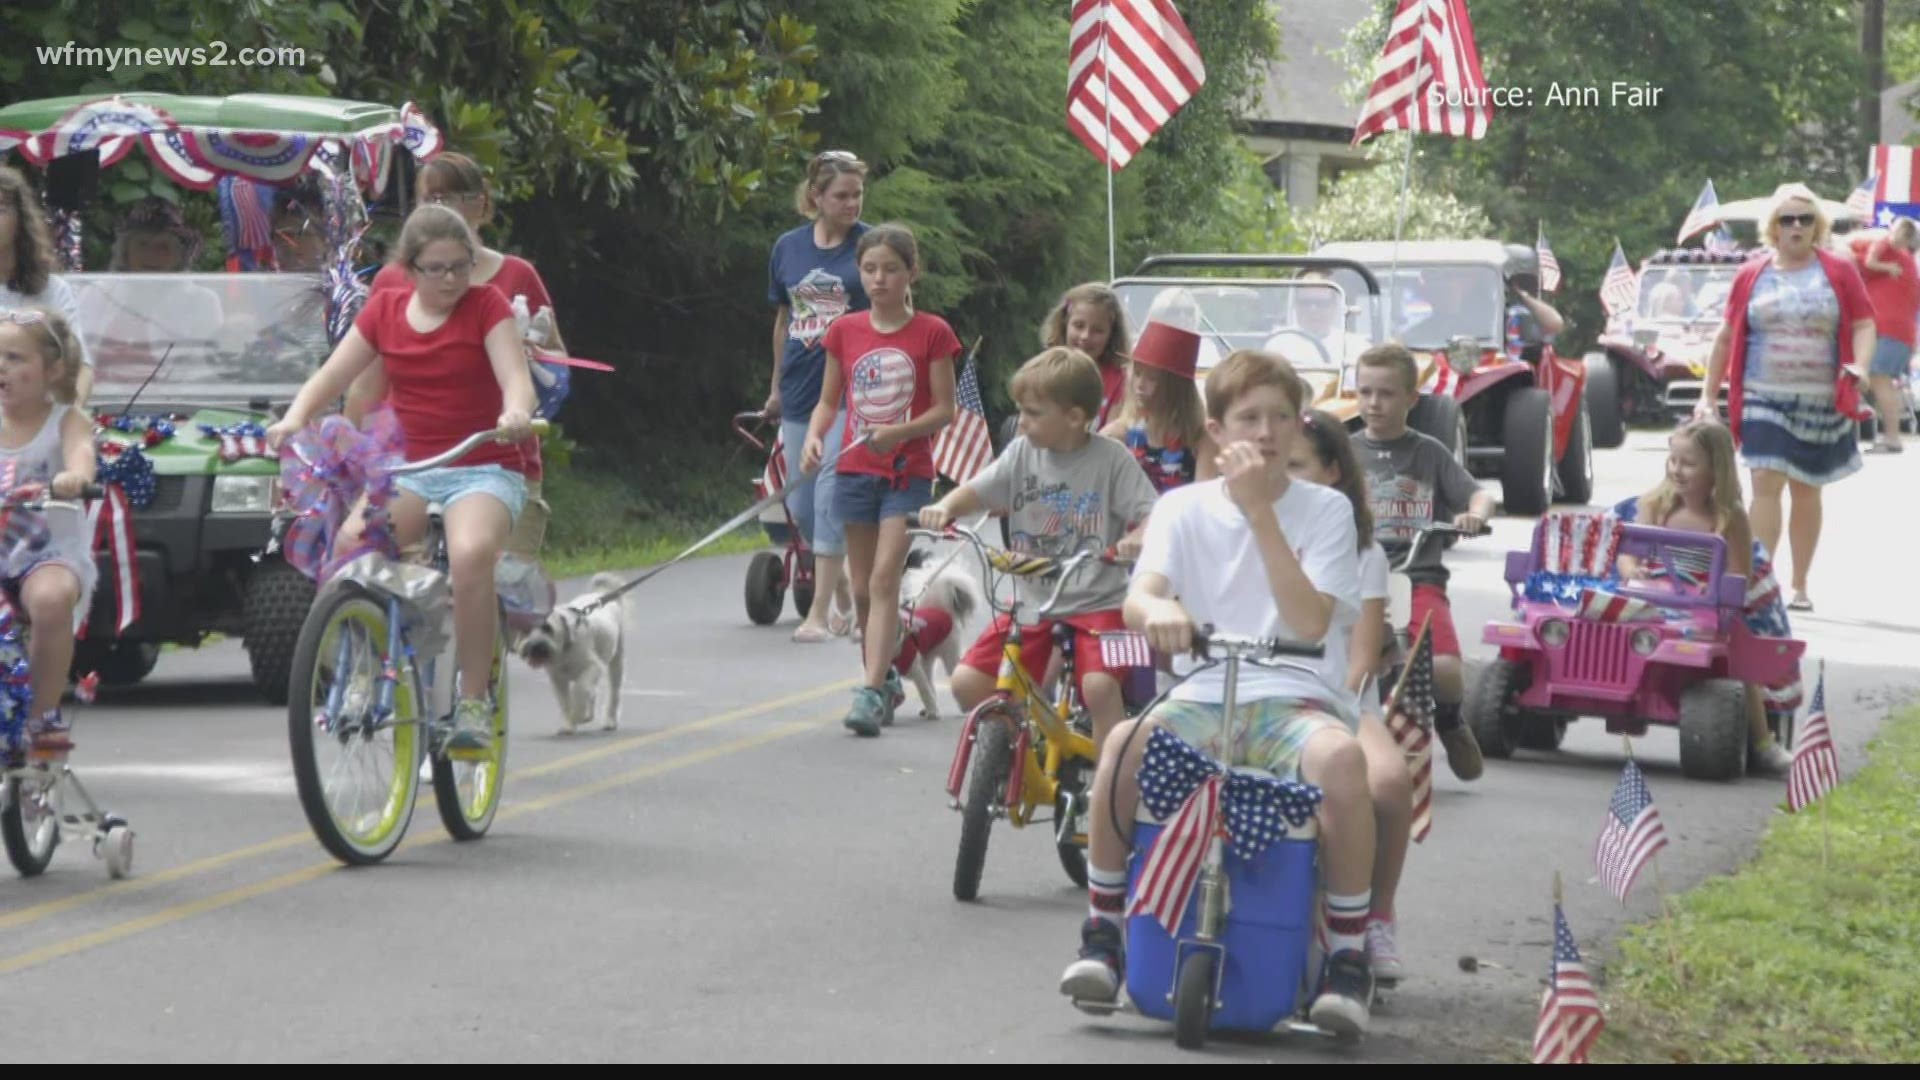 The Fair Family’s 25th annual July 4th Fun Parade was cancelled last year due to the pandemic.  But it’s bigger, better and back on this year!